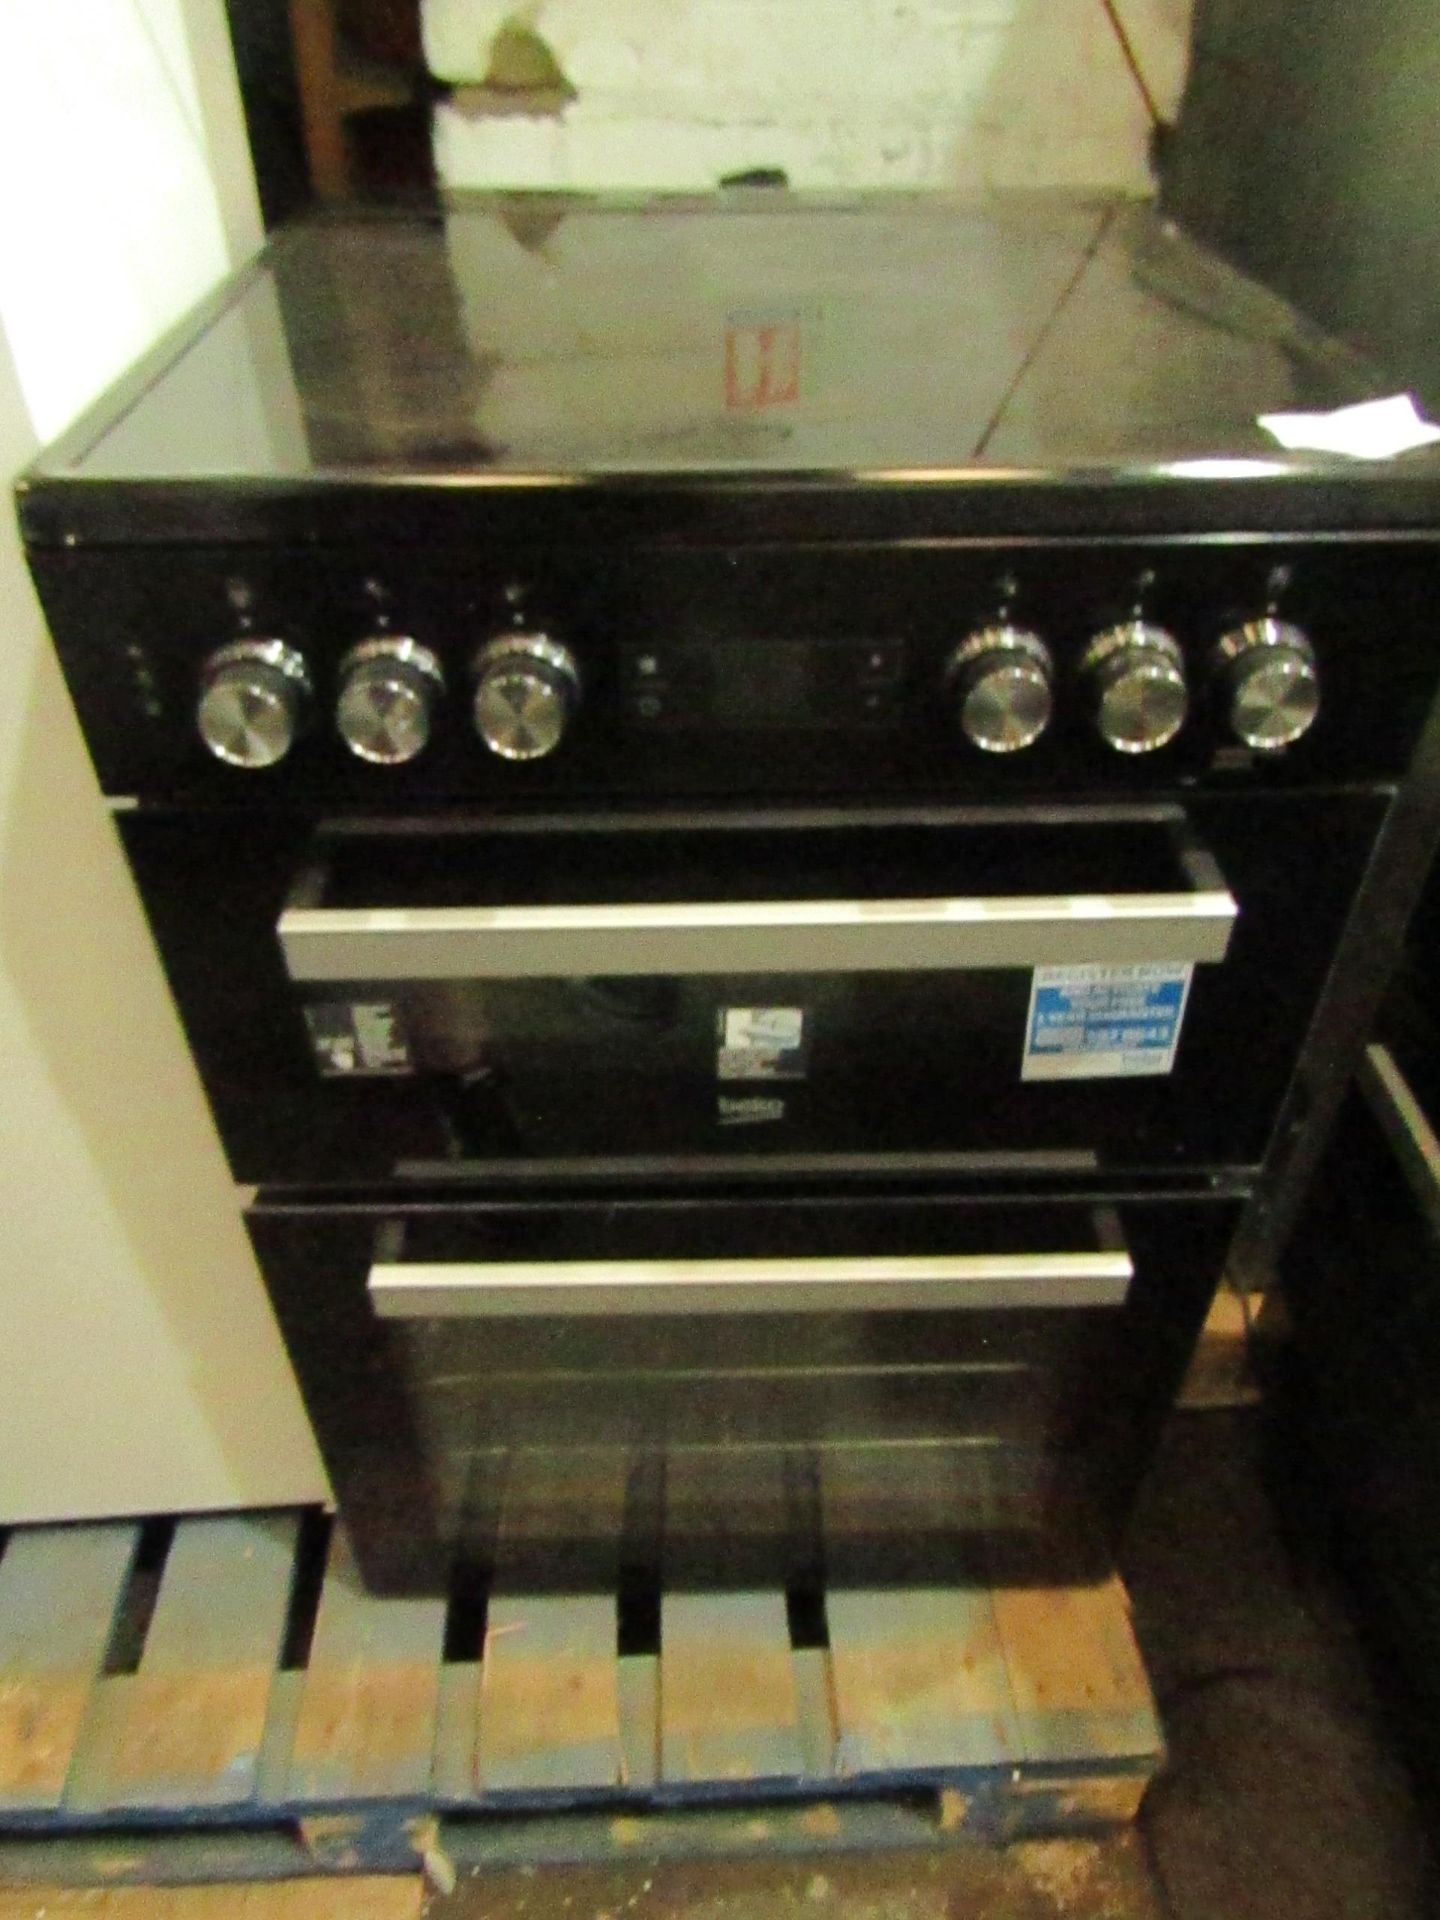 BEKO 60 cm Electric Ceramic Cooker Black & Silver XDC653K RRP ??389.00 - This item looks to be in